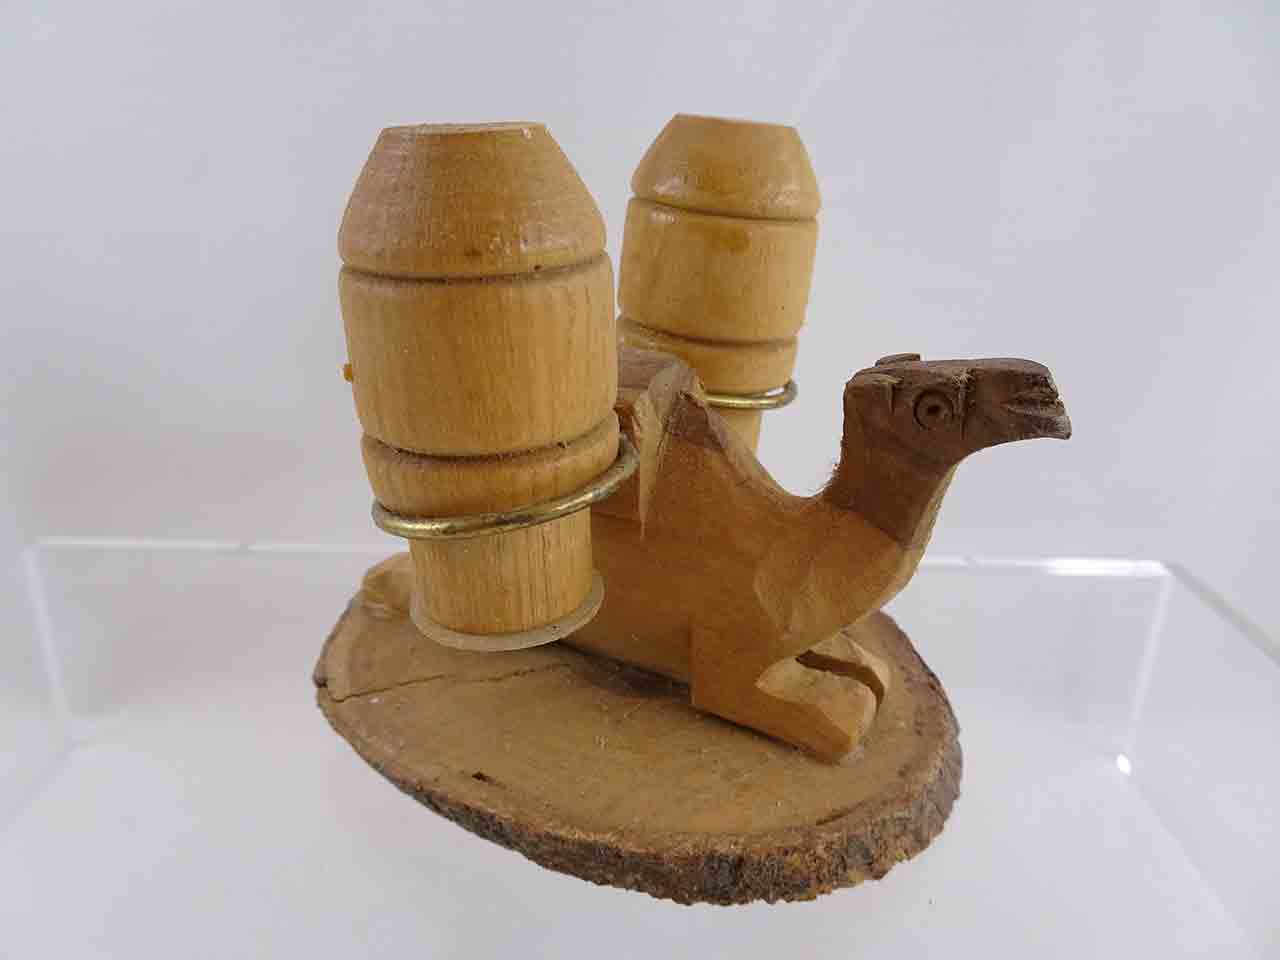 Wood camel carrier salt and pepper shakers